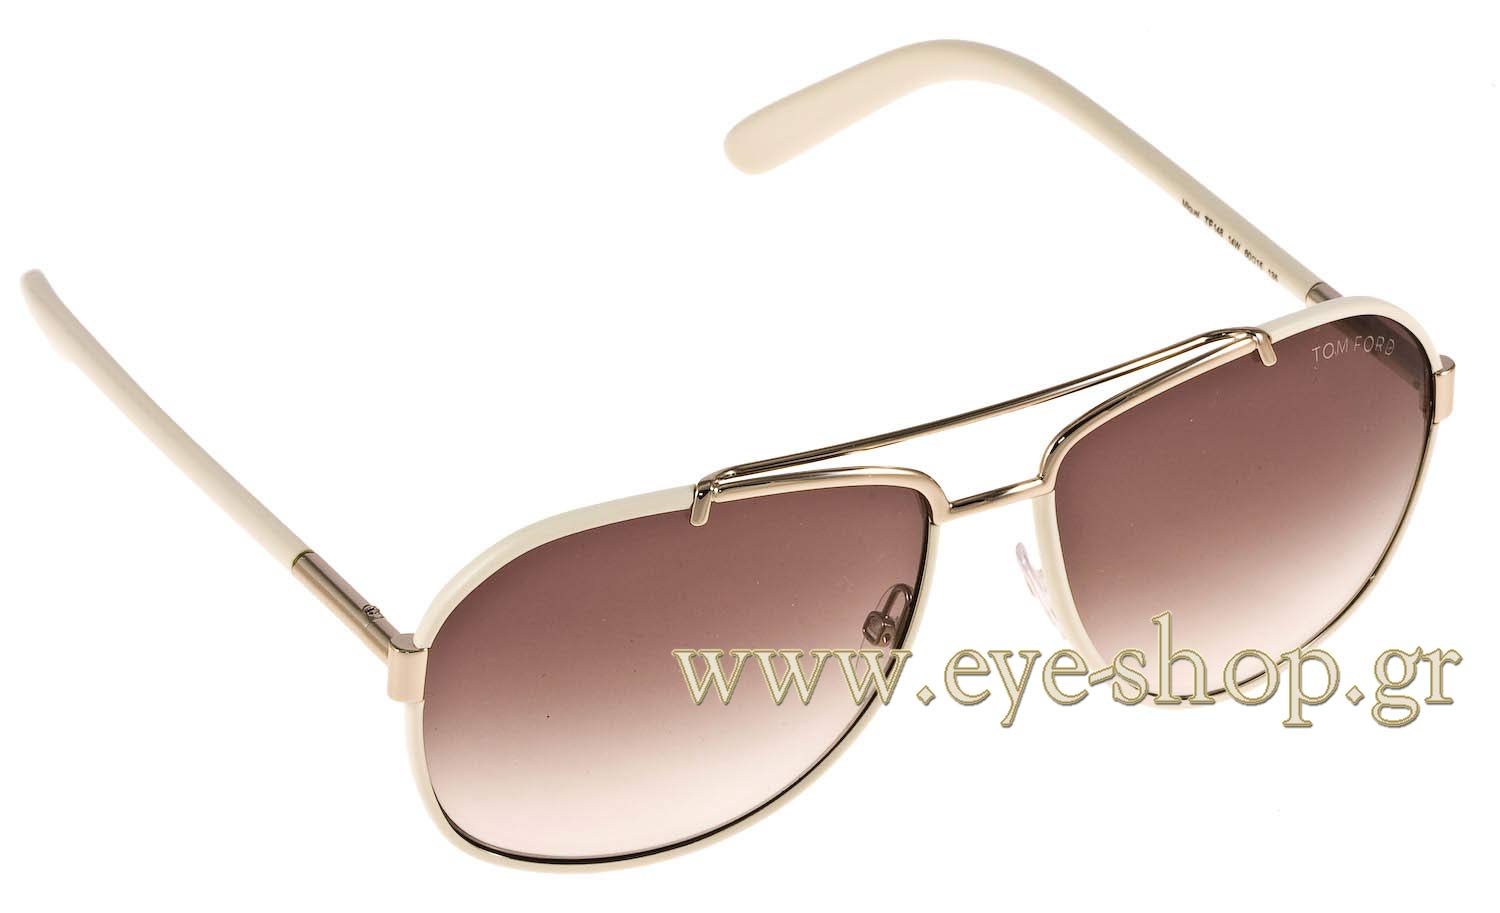 Tom Ford TF148 Miguel